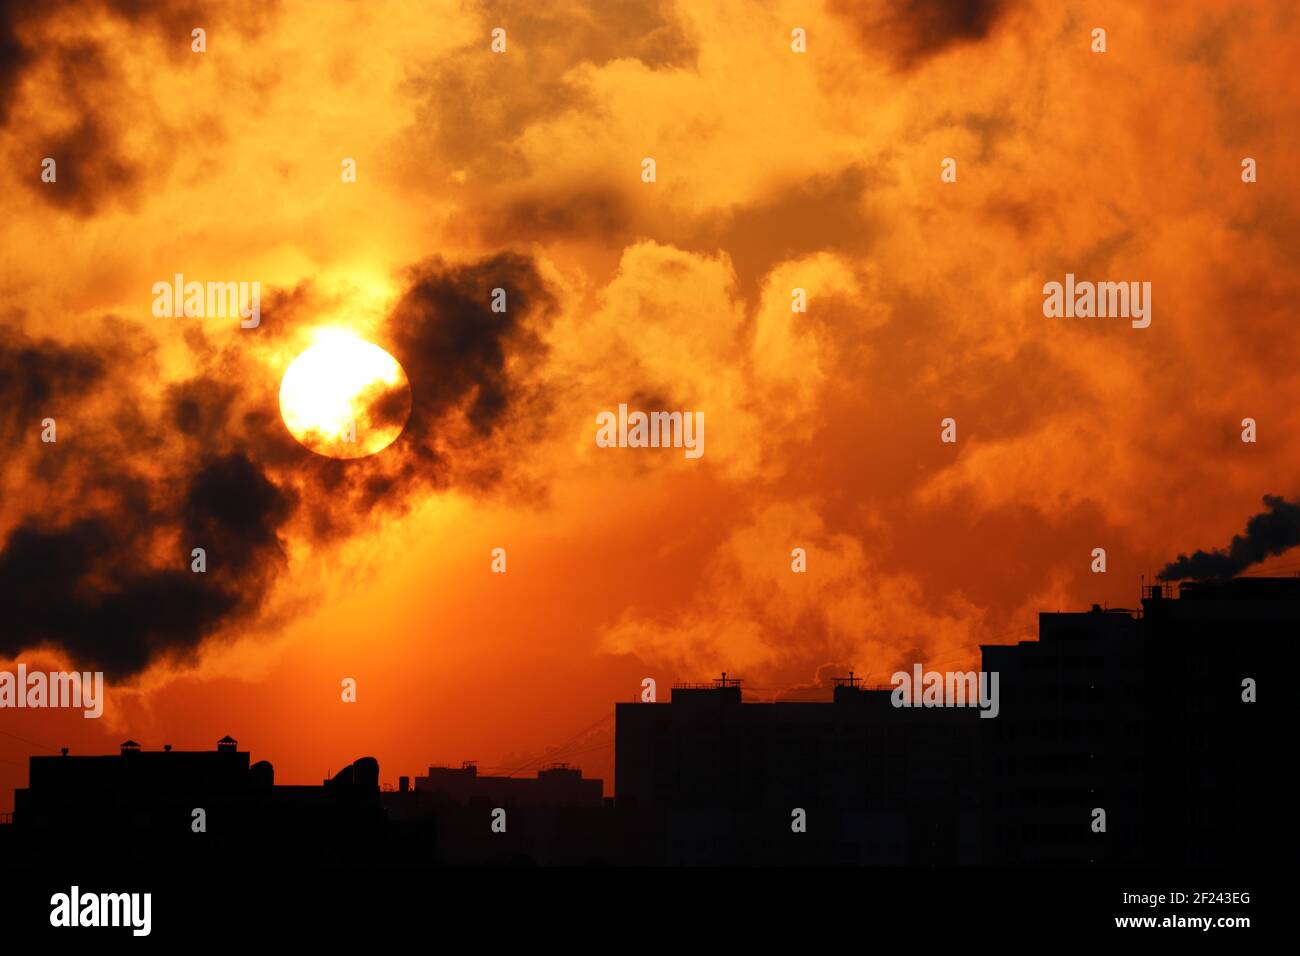 Sunrise on colorful dramatic sky, orange sun shining through dark clouds above the buildings silhouettes. Picturesque city landscape for horror Stock Photo